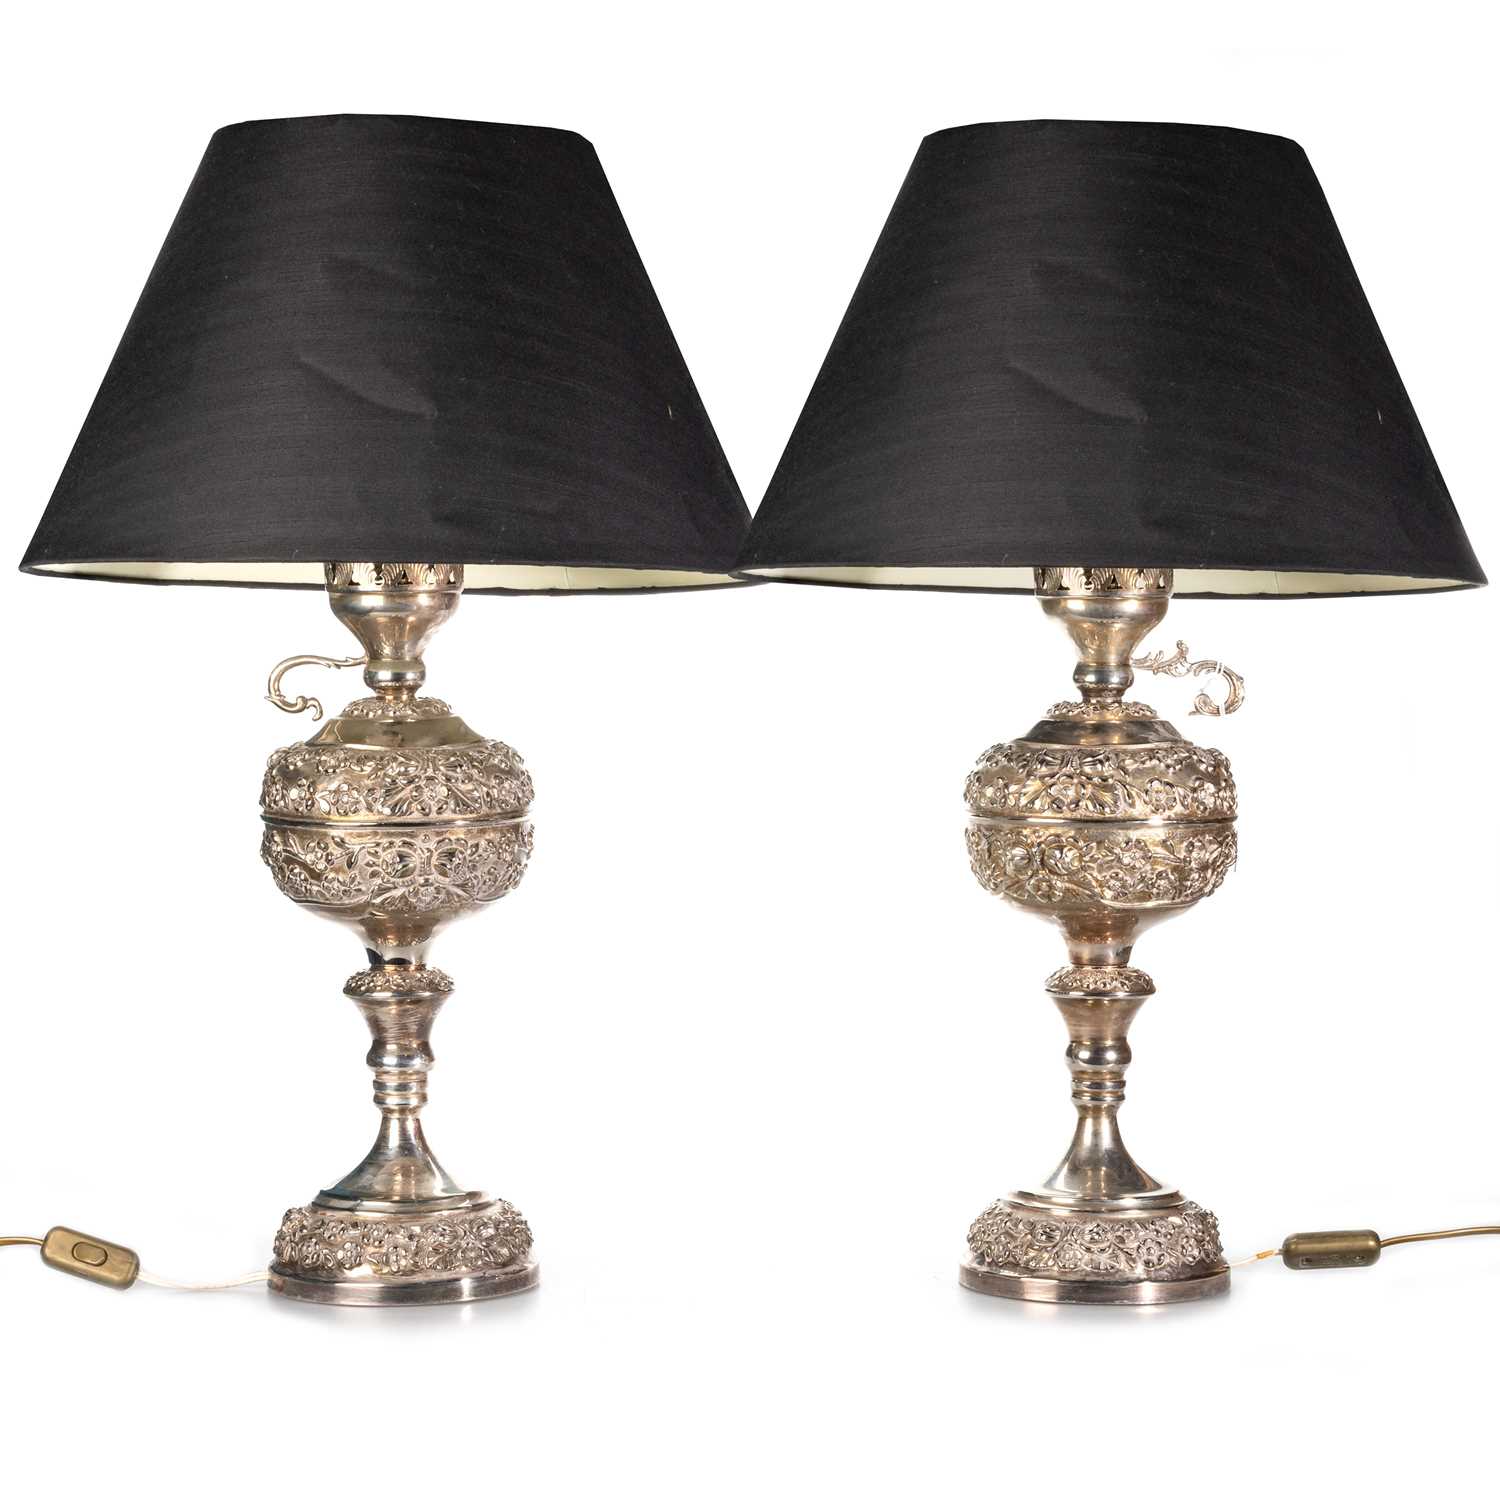 A PAIR OF GREEK SILVER-PLATED LAMPS